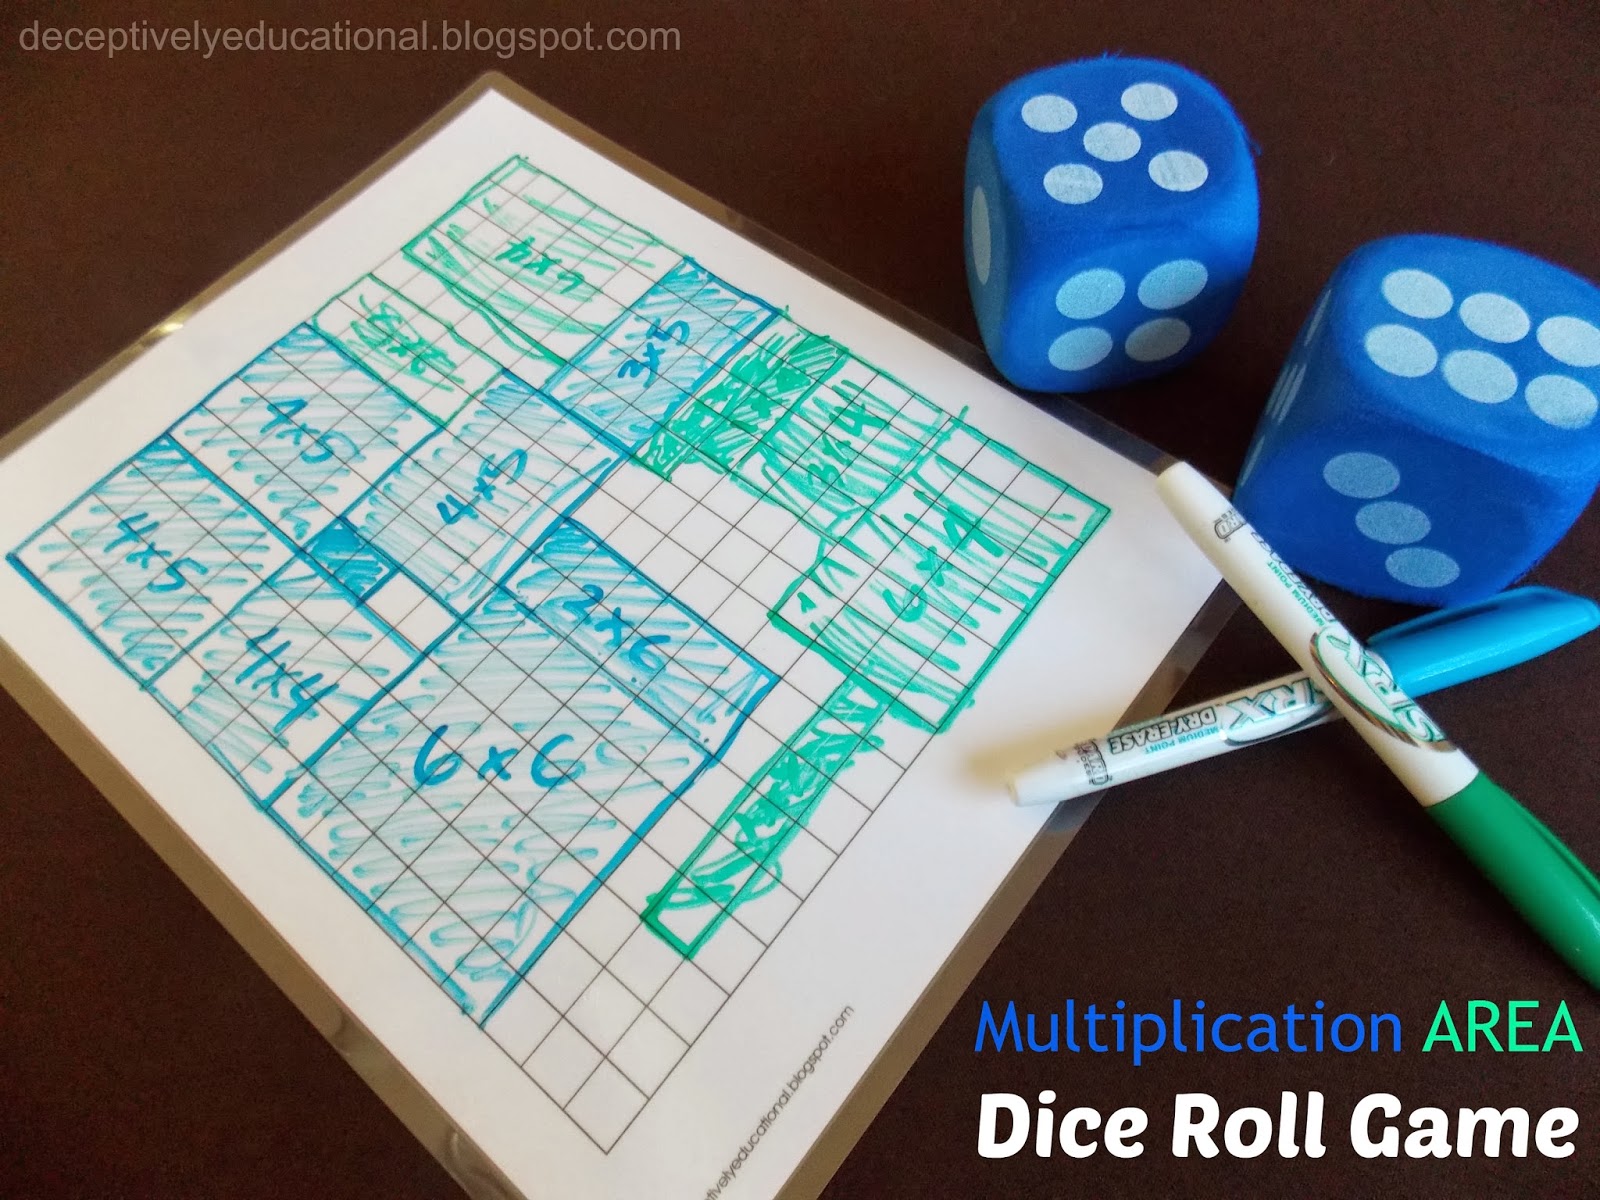 relentlessly-fun-deceptively-educational-multiplication-area-dice-roll-game